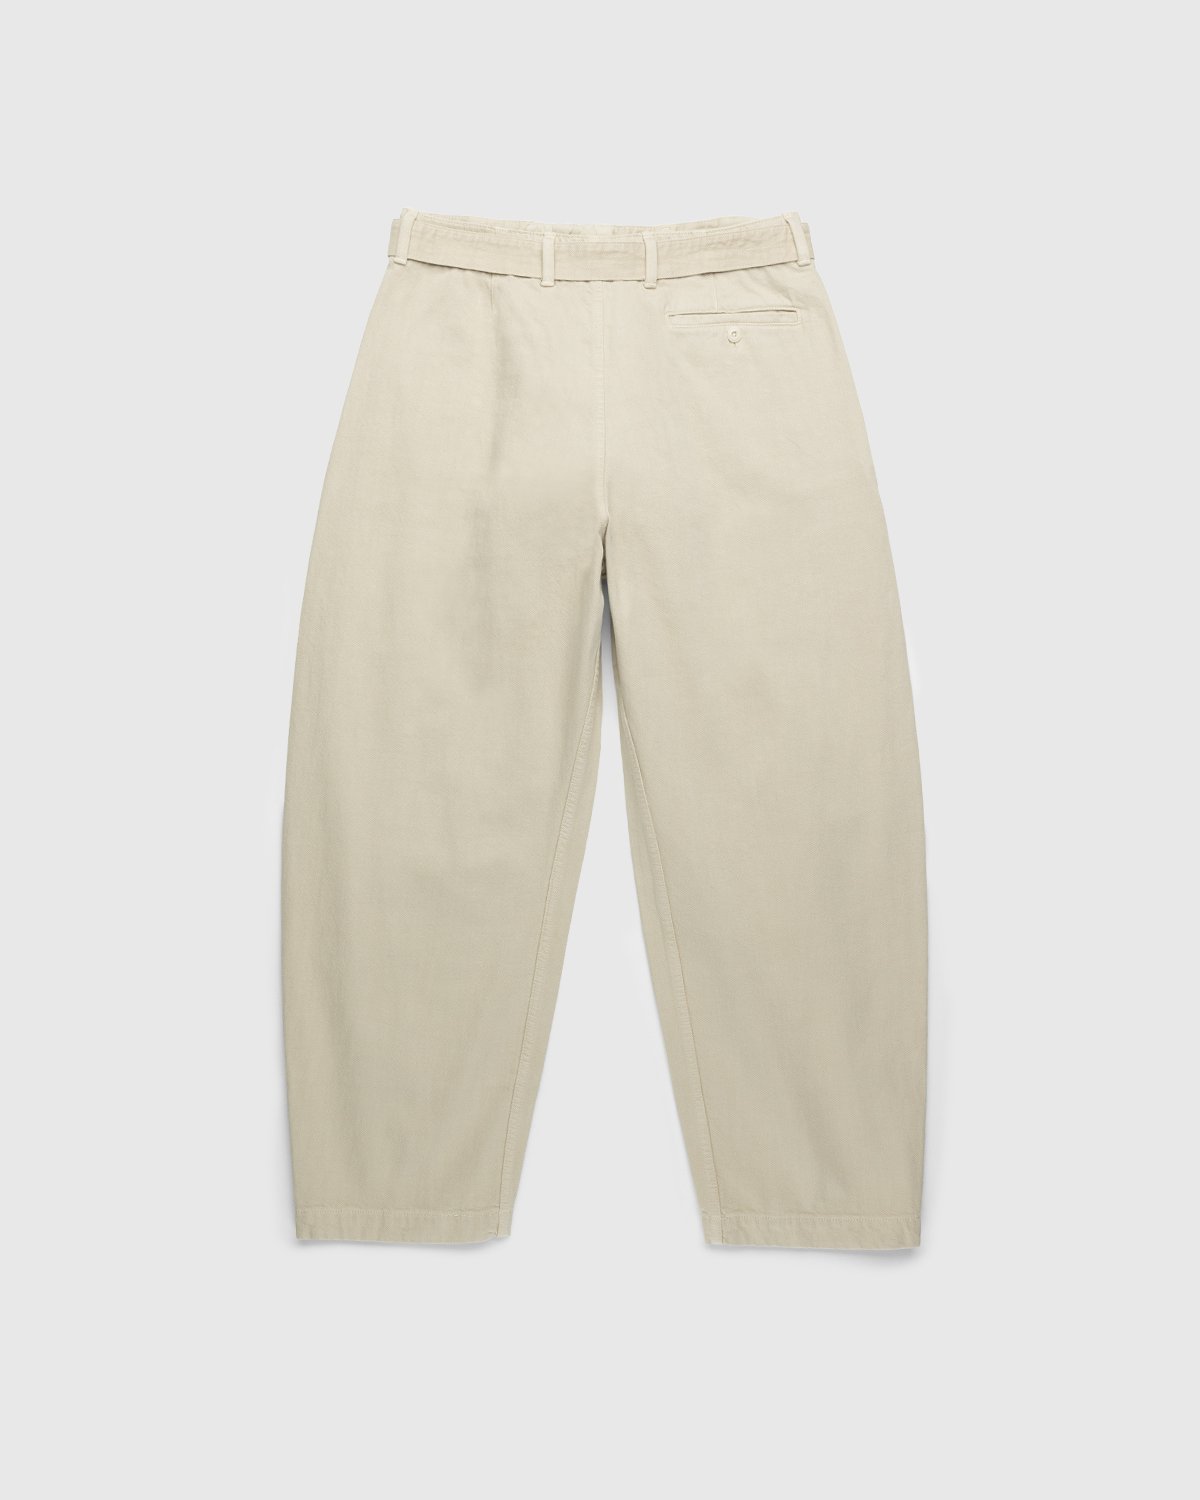 Lemaire - Rinsed Denim Twisted Pants Saltpeter - Clothing - Beige - Image 2